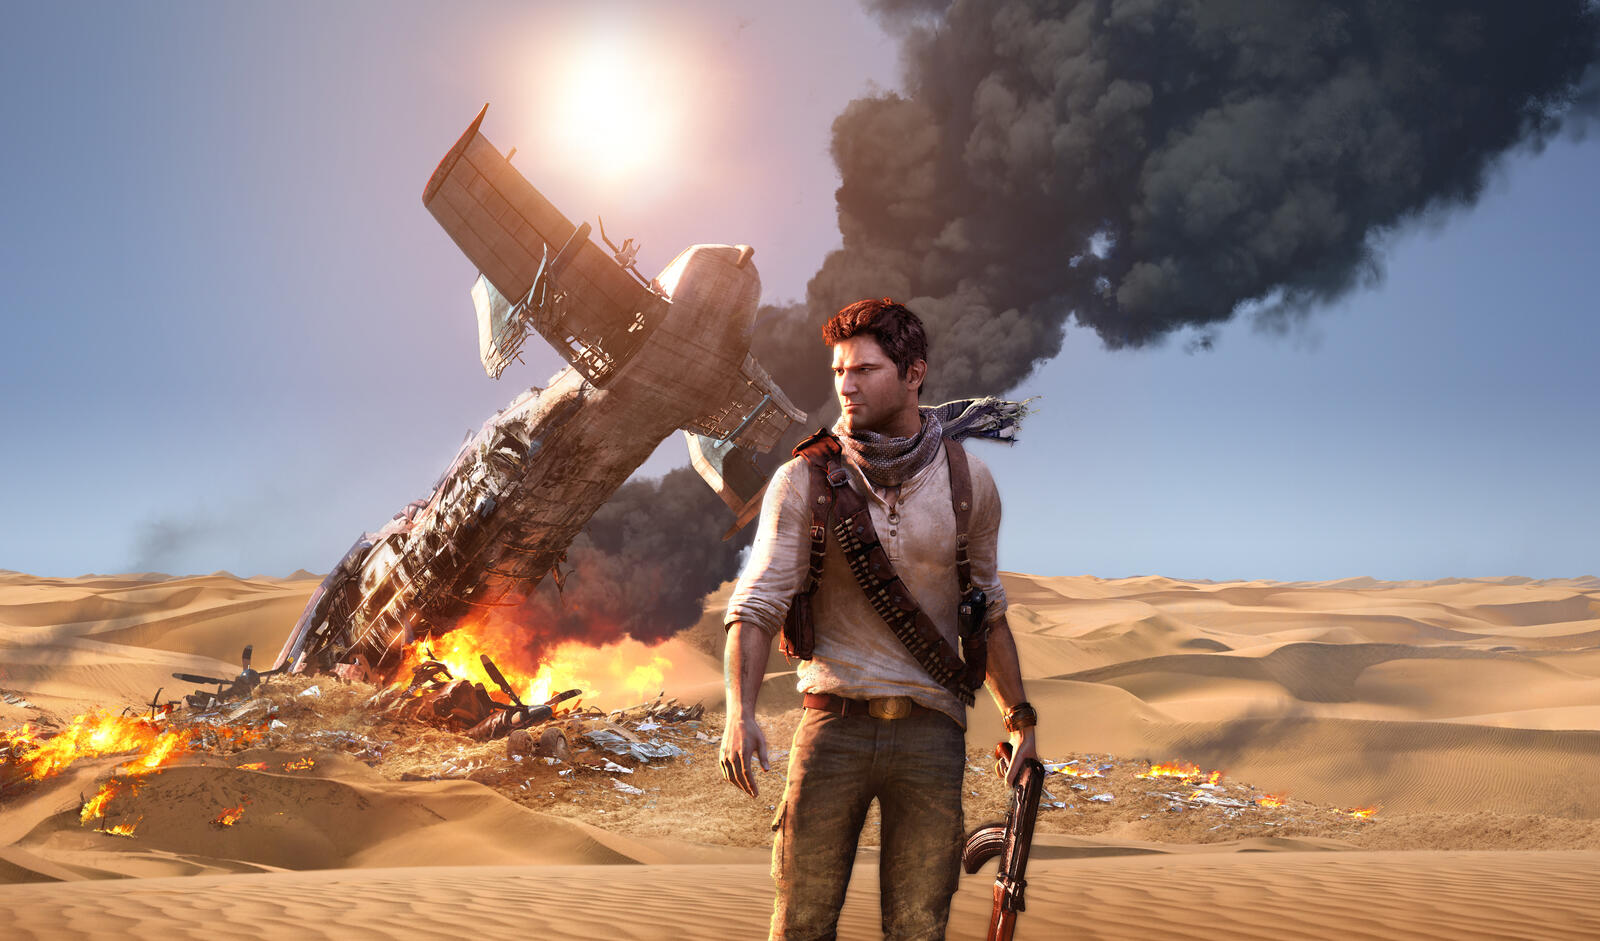 Free photo A downed airplane in the desert in the game uncharted 4